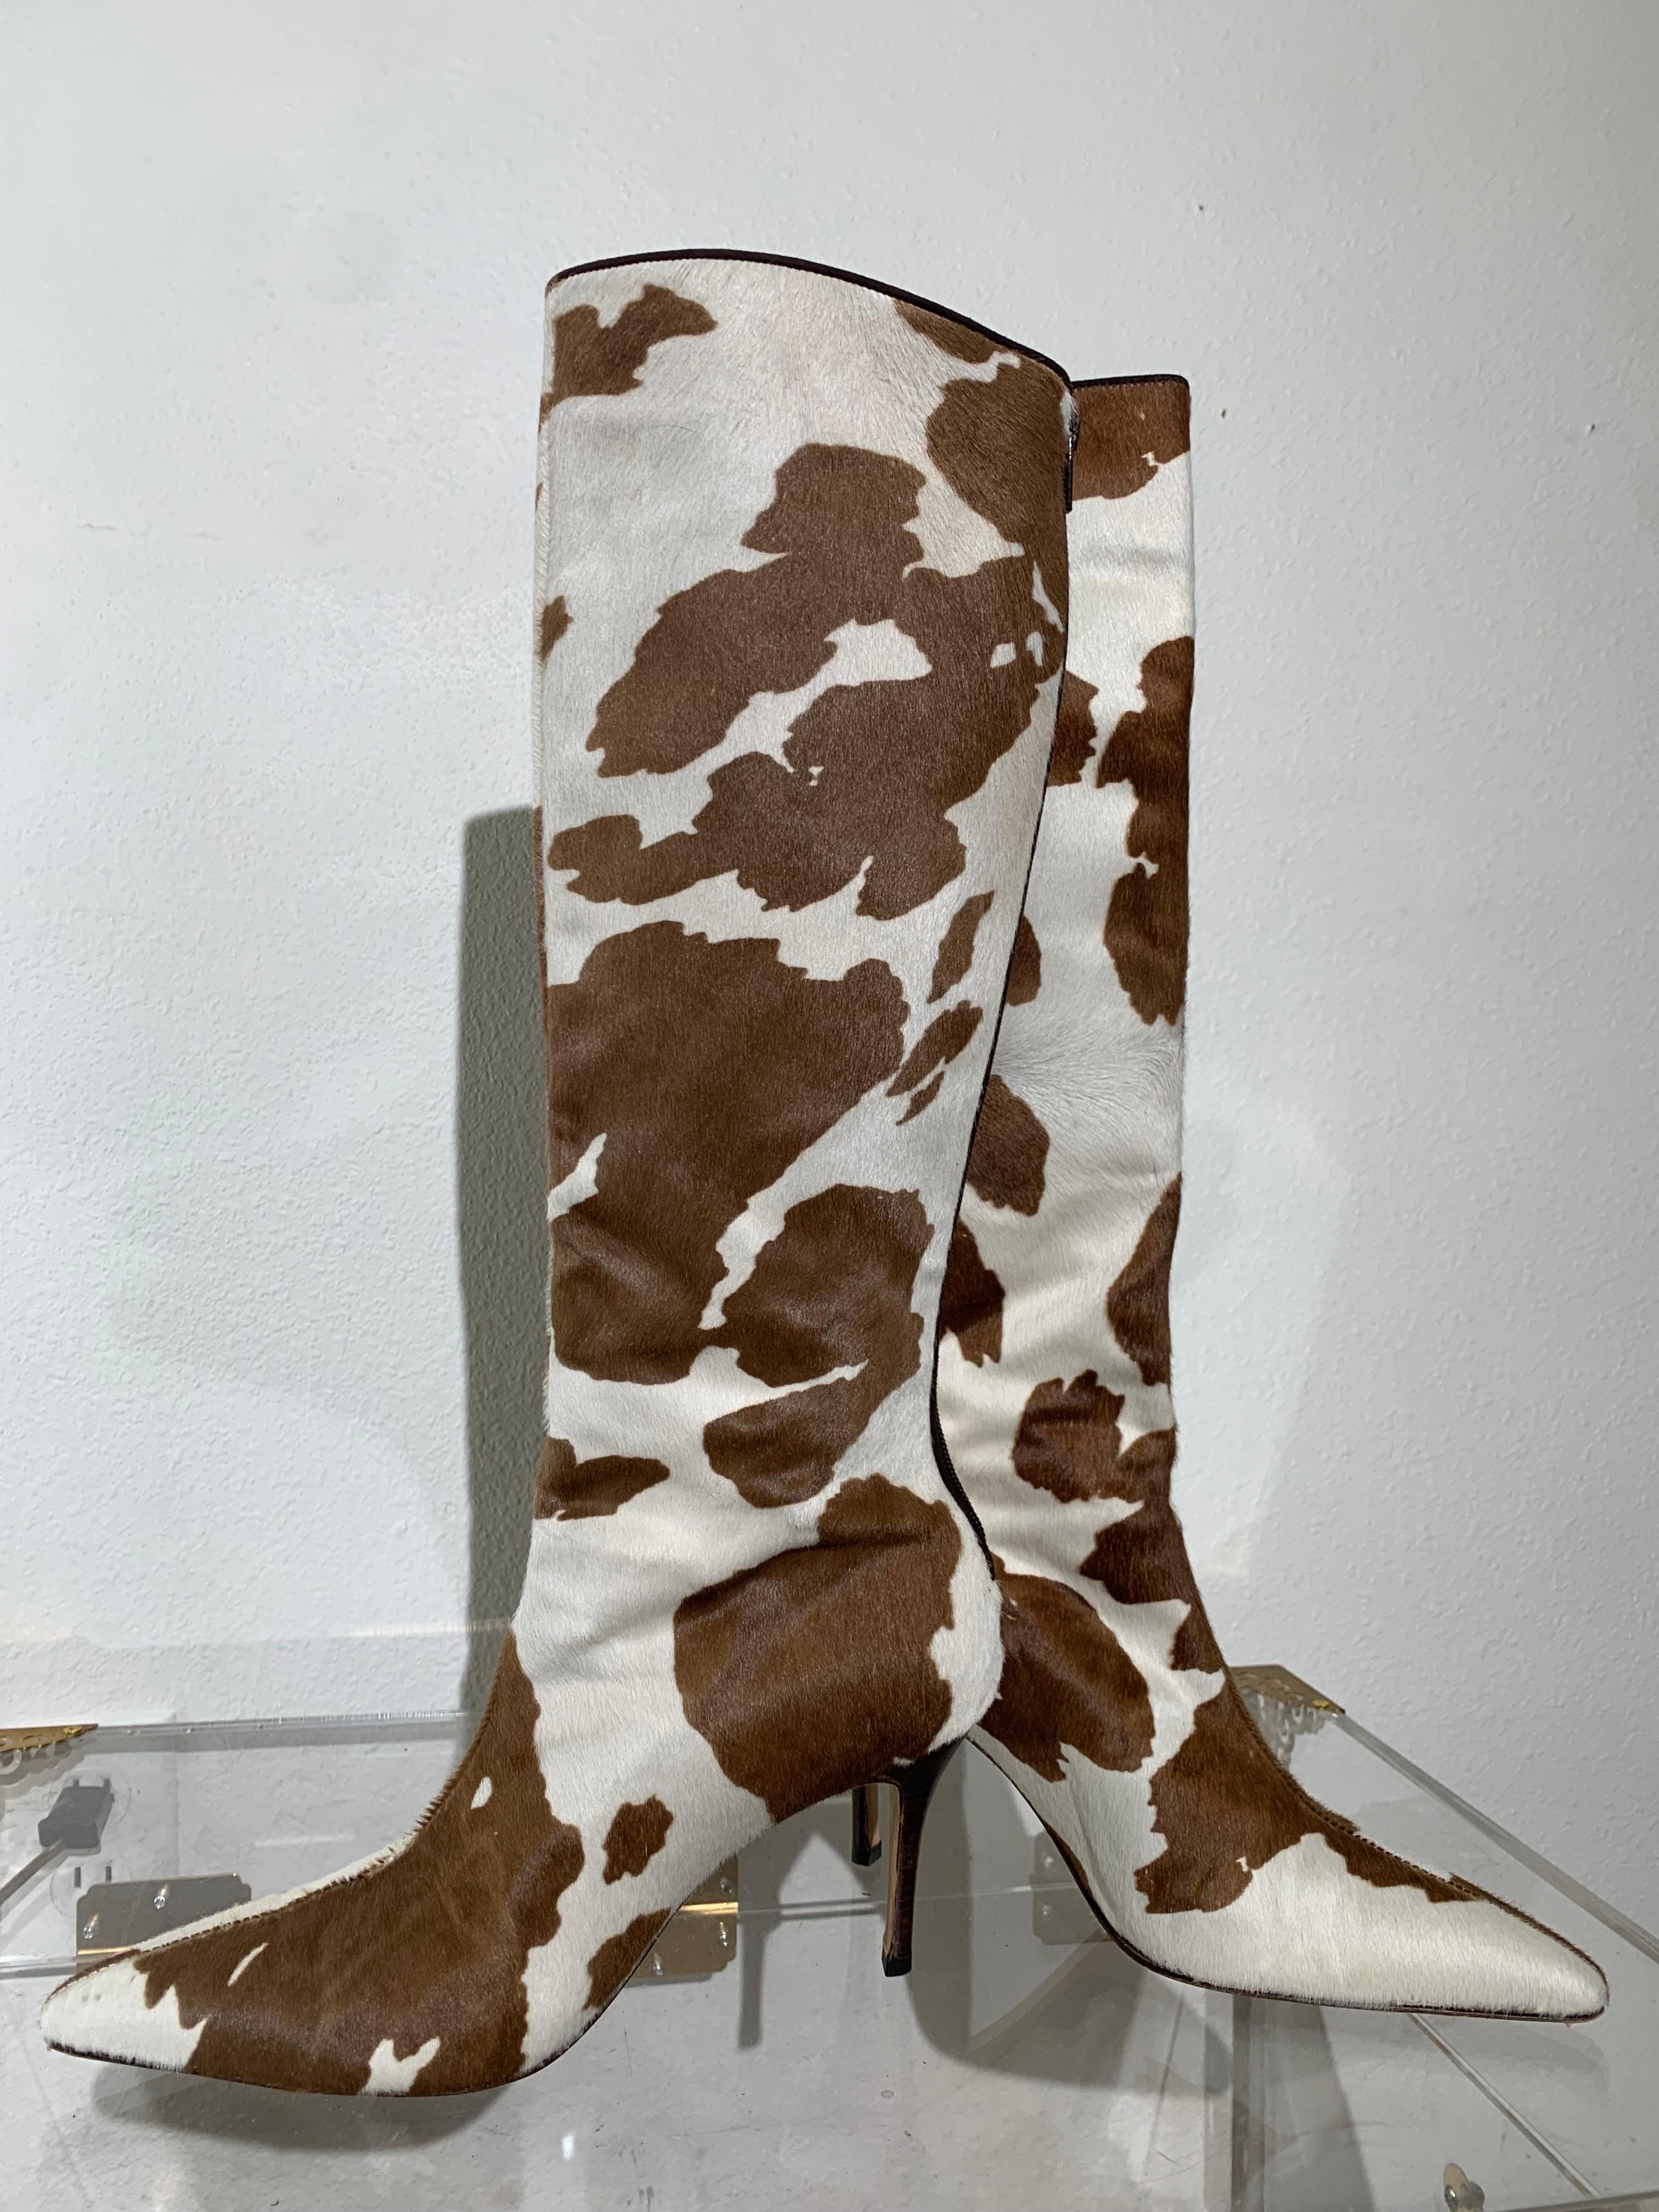 Manolo Blahnik Brown & White Cow Print Leather Knee-High Stiletto Heel Boots In Excellent Condition For Sale In Gresham, OR